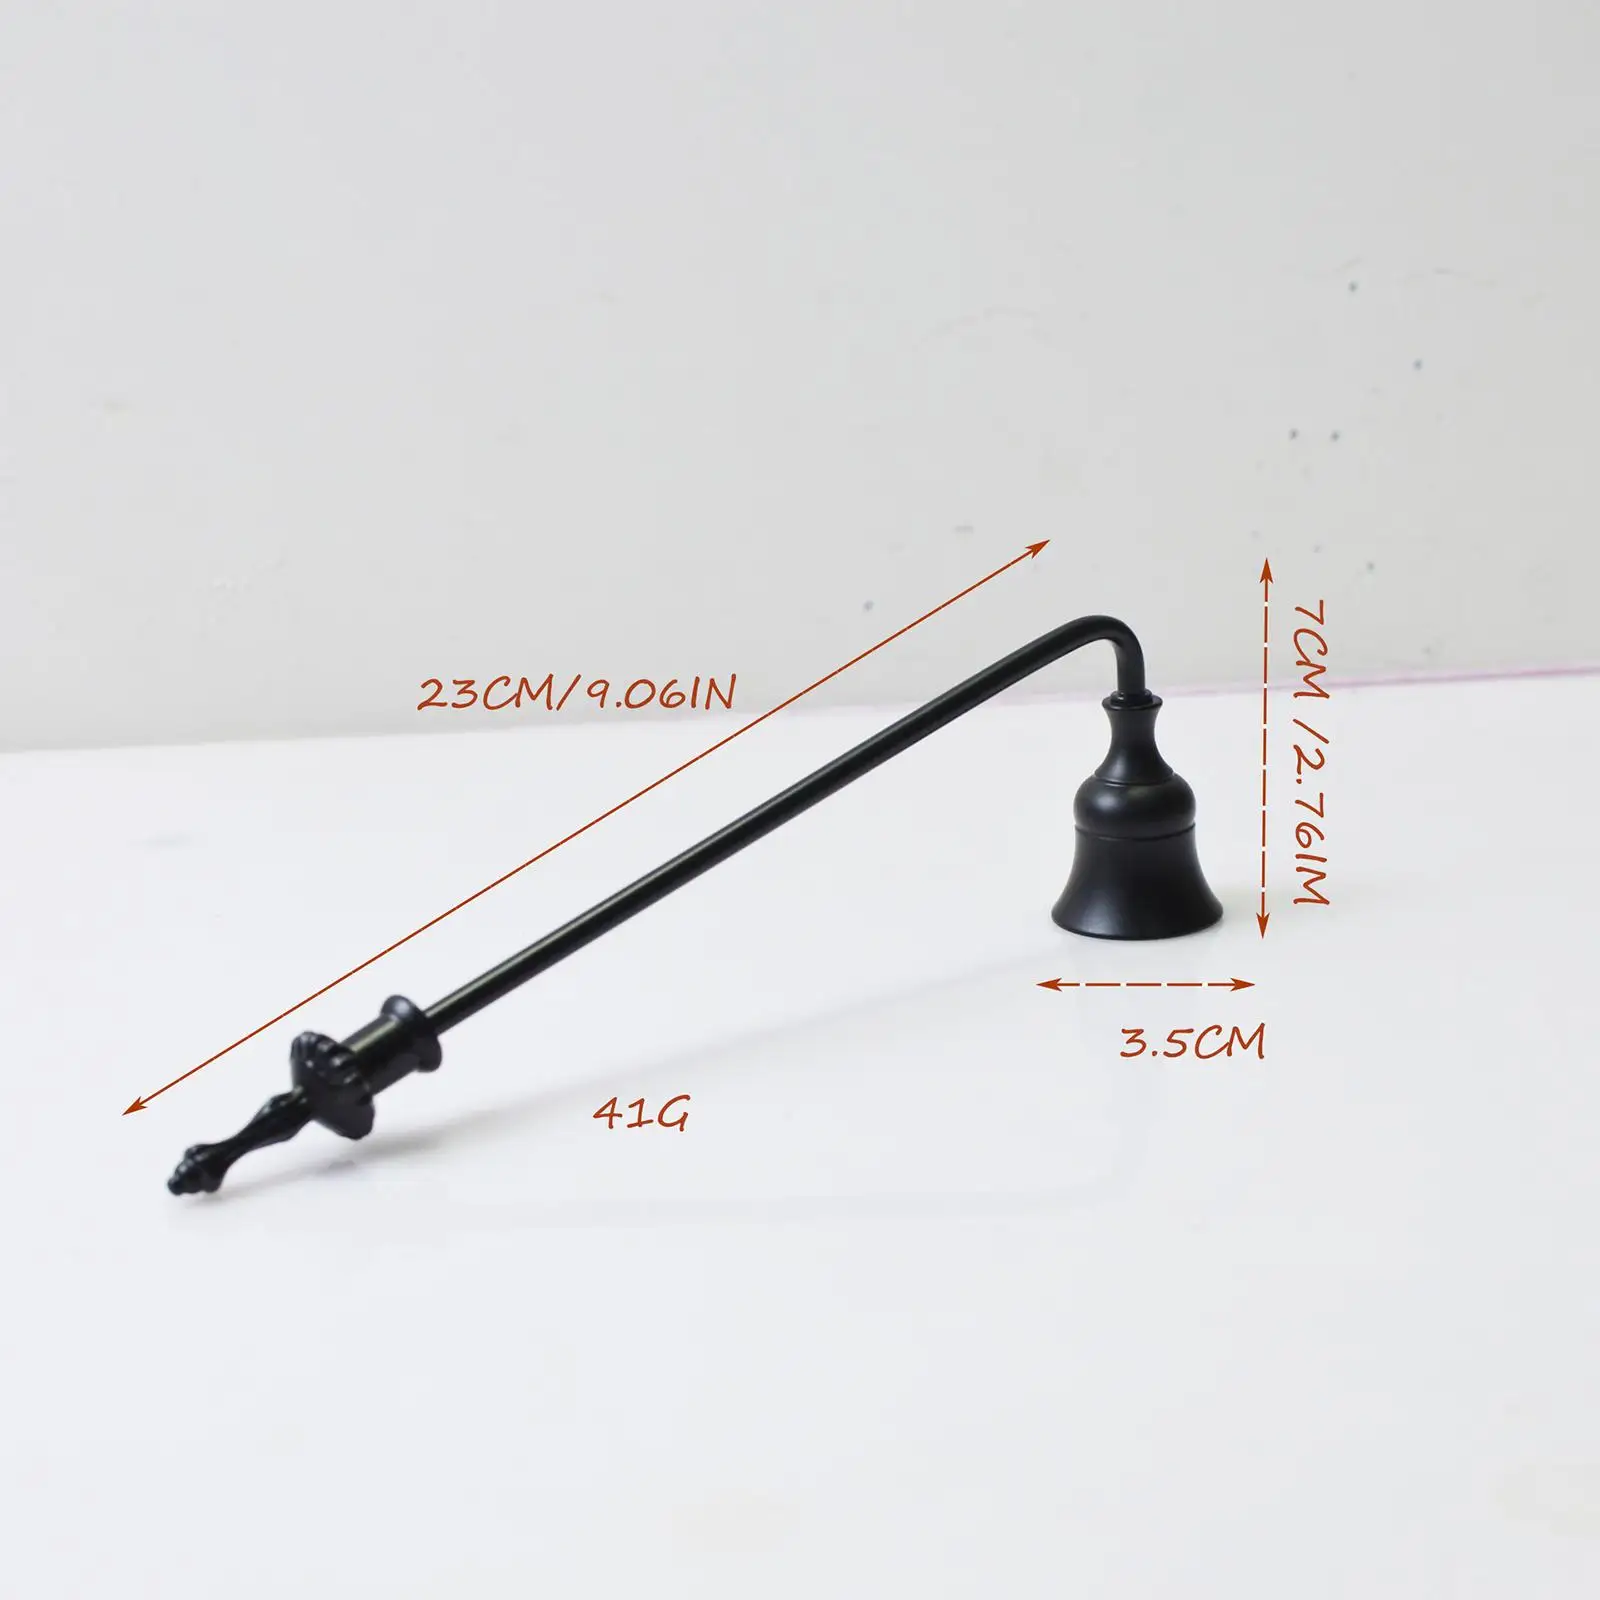 Candle Snuff Tool Candle Extinguisher Metal Material Decorative 9inch Long for Candle Lovers Multifunctional Accessories